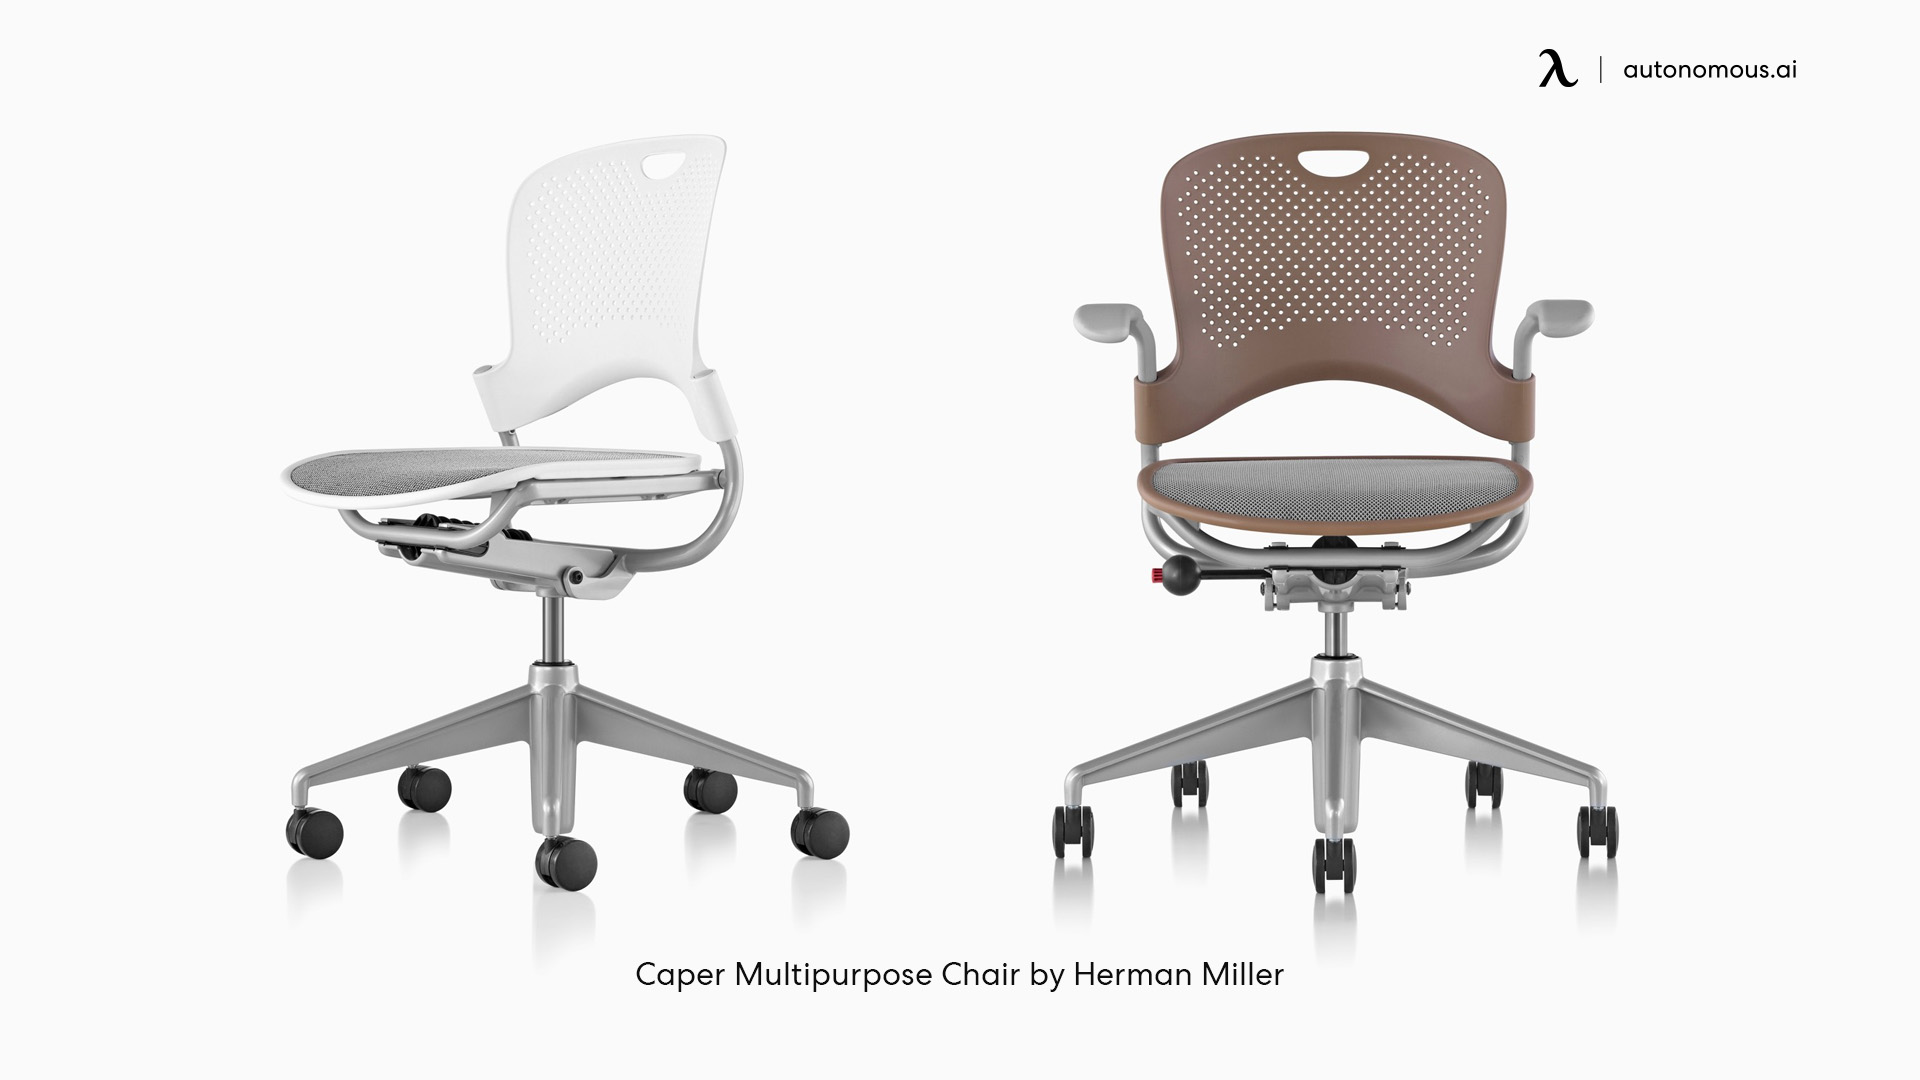 Caper Multipurpose affordable office chairs